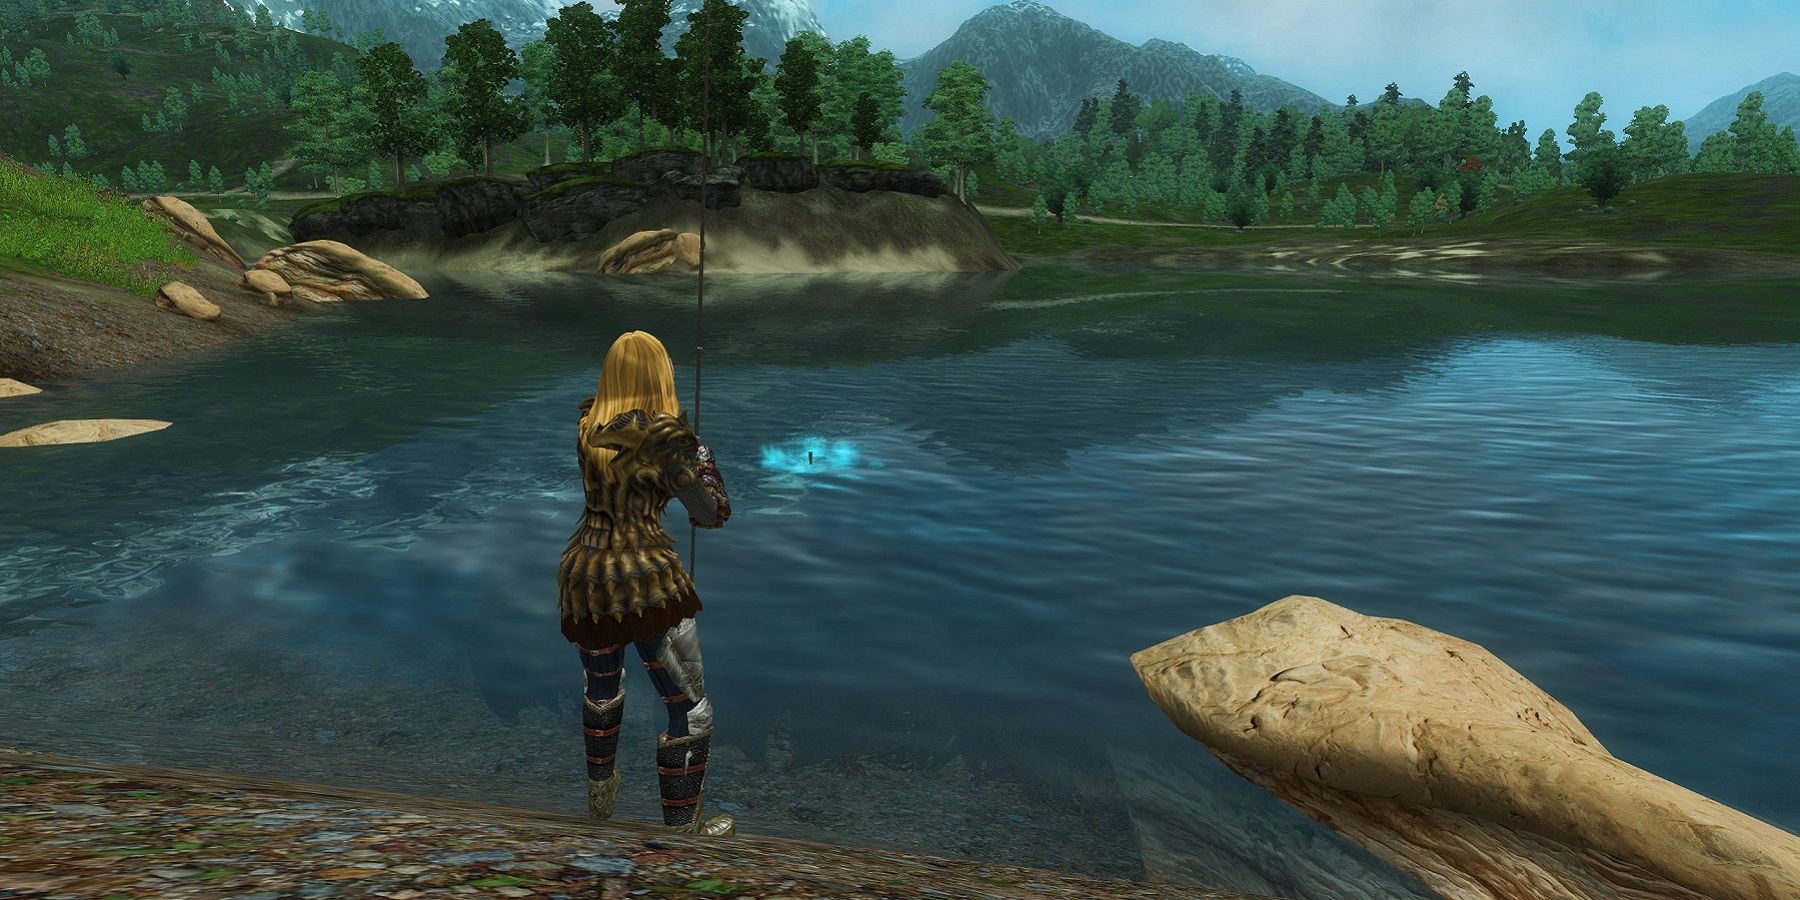 Screenshot from The Elder Scrolls 5: Skyrim showing the player in third-person fishing in a lake.